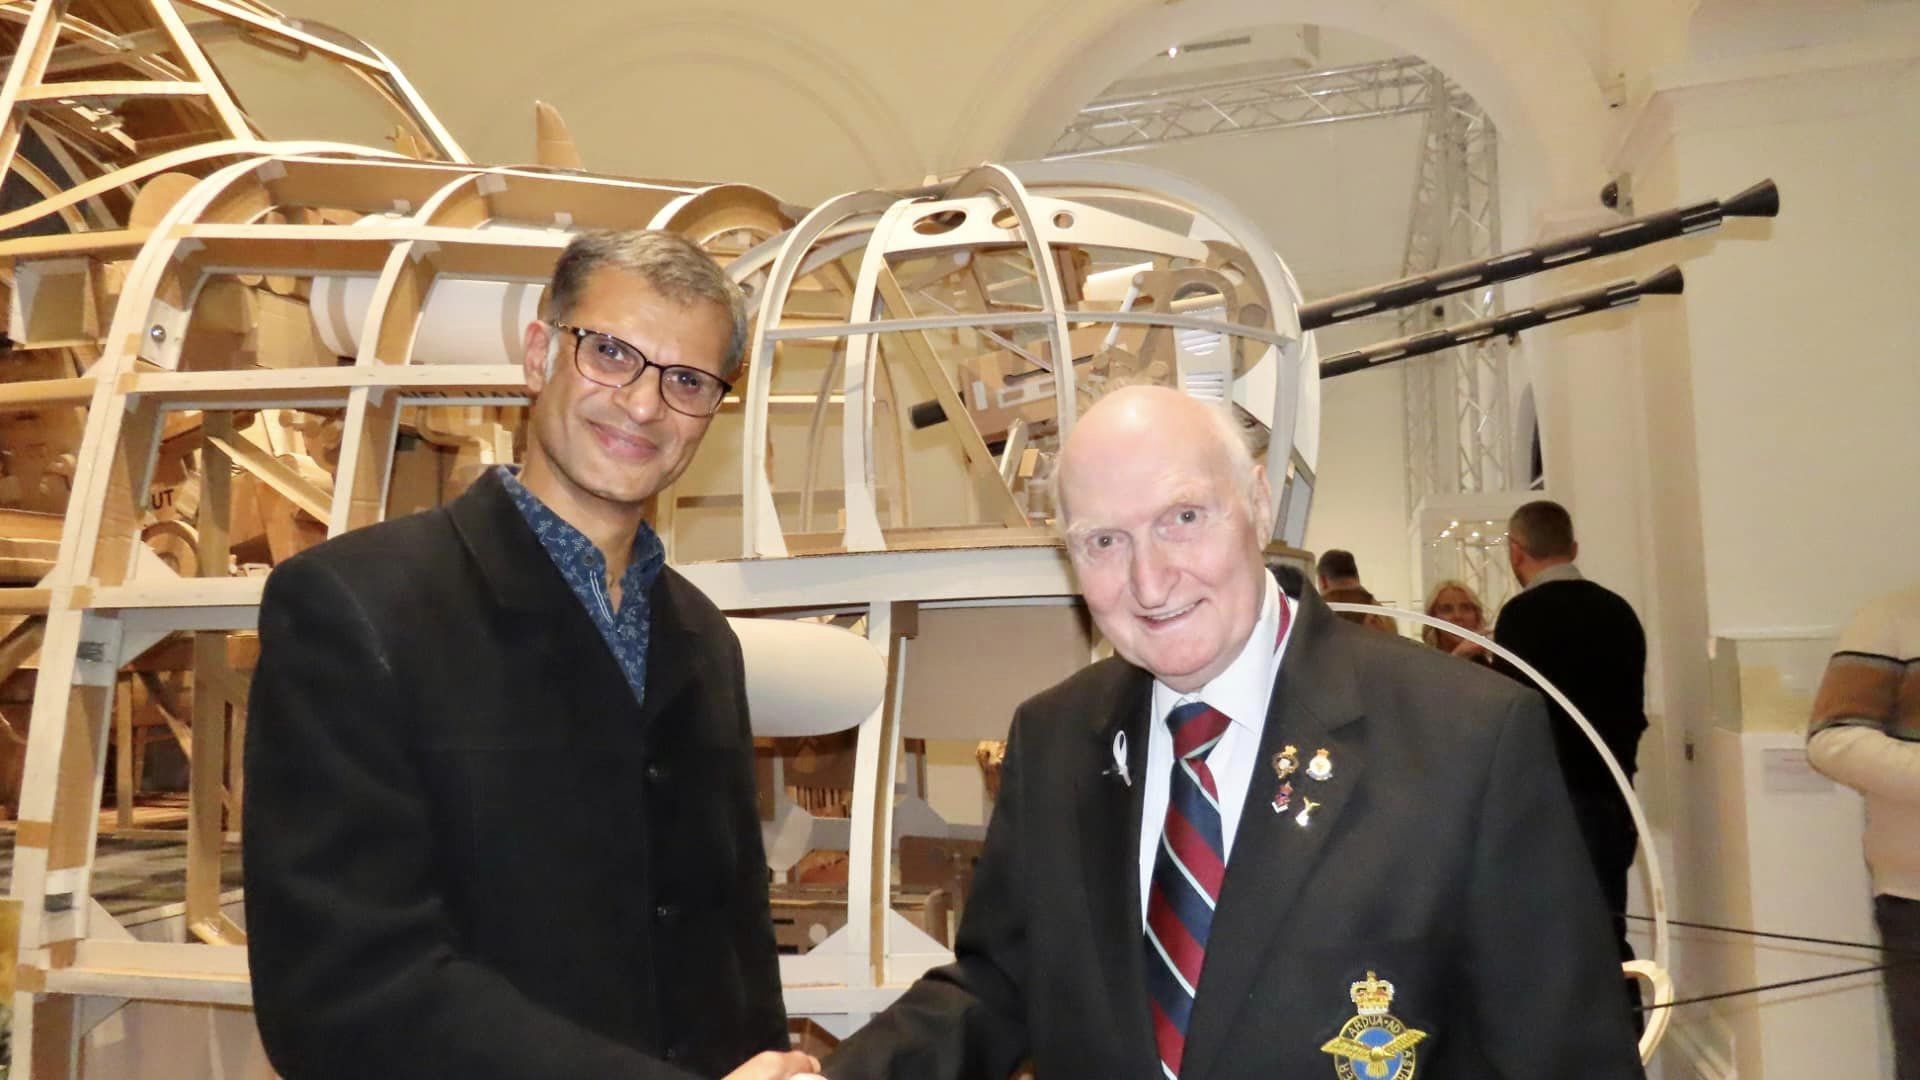 Guests enjoyed the launch night of the new The Many / Paper My Wishes exhibition by artist Suhail Shaikh at the Atkinson in Southport. Suhail Shaikh and RAFA Chairman David McGregor. Photo by Andrew Brown Stand Up For Southport